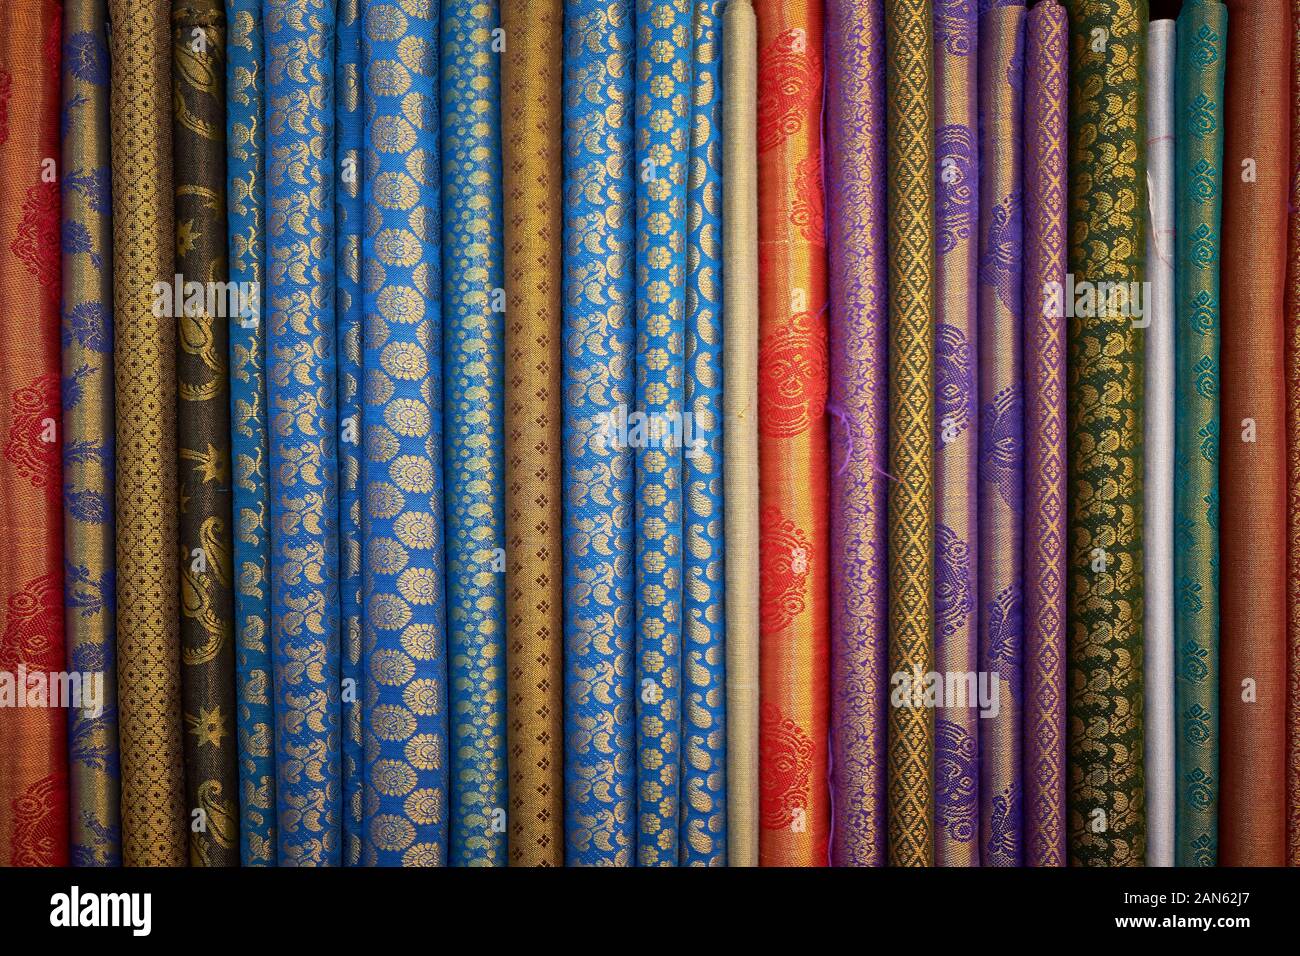 A variety of traditional Sari, Salwar Kameez Indian fabric on display. At a fabric, clothing store in downtown Kuala Lumpur, Malaysia. Stock Photo